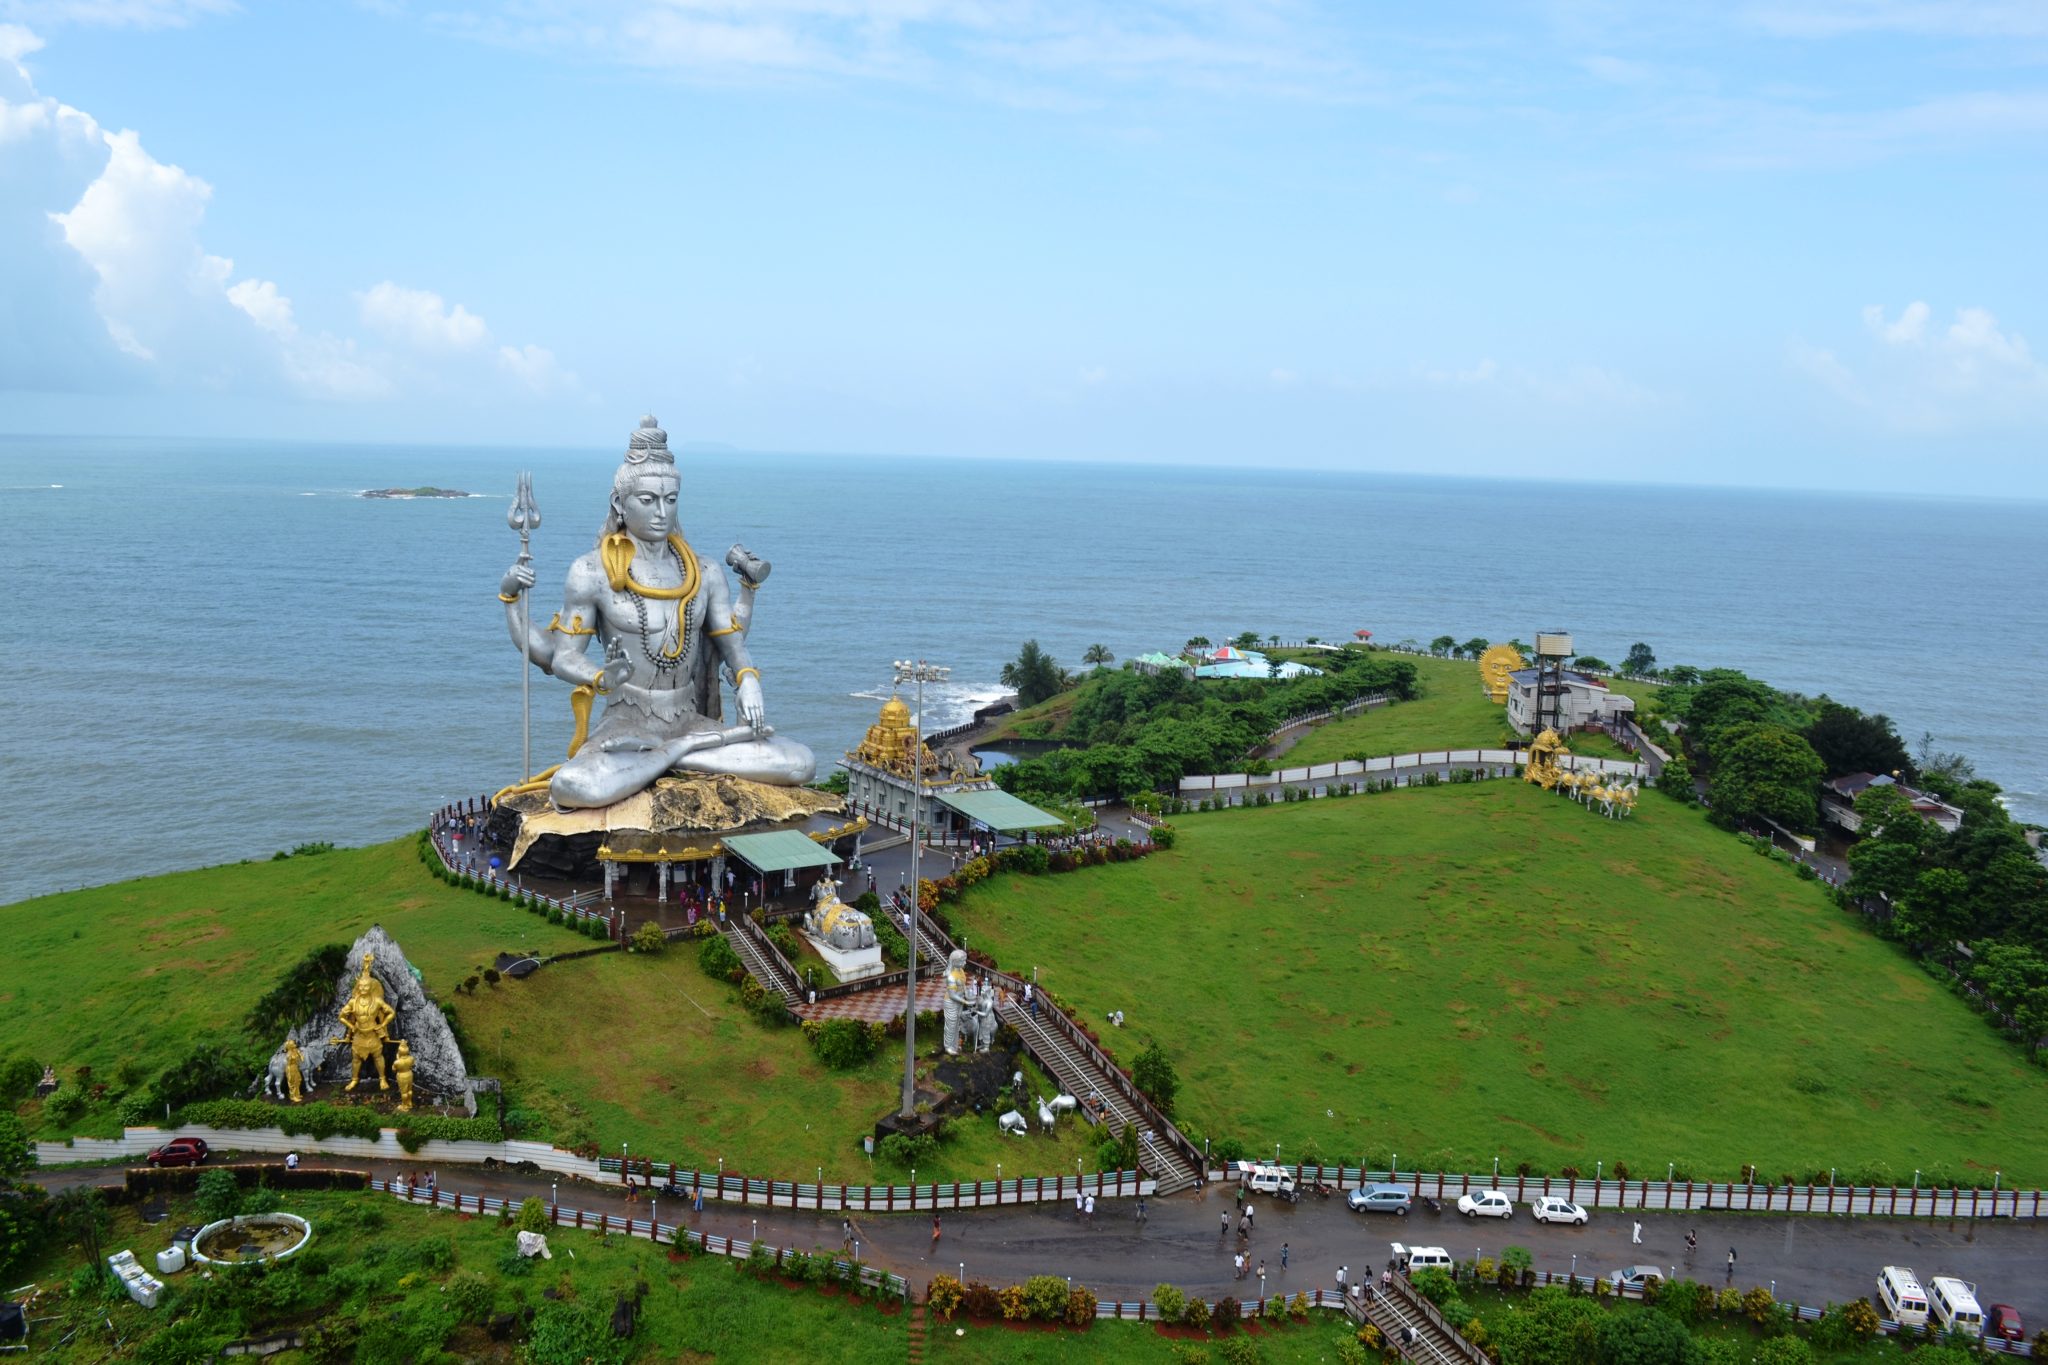 Statue of Lord Shiva. Located in Murdeshwar, Karnataka, India. A famous pilgrimage spot in Karnataka. This place is surrounded by the Arabian sea on three sides.